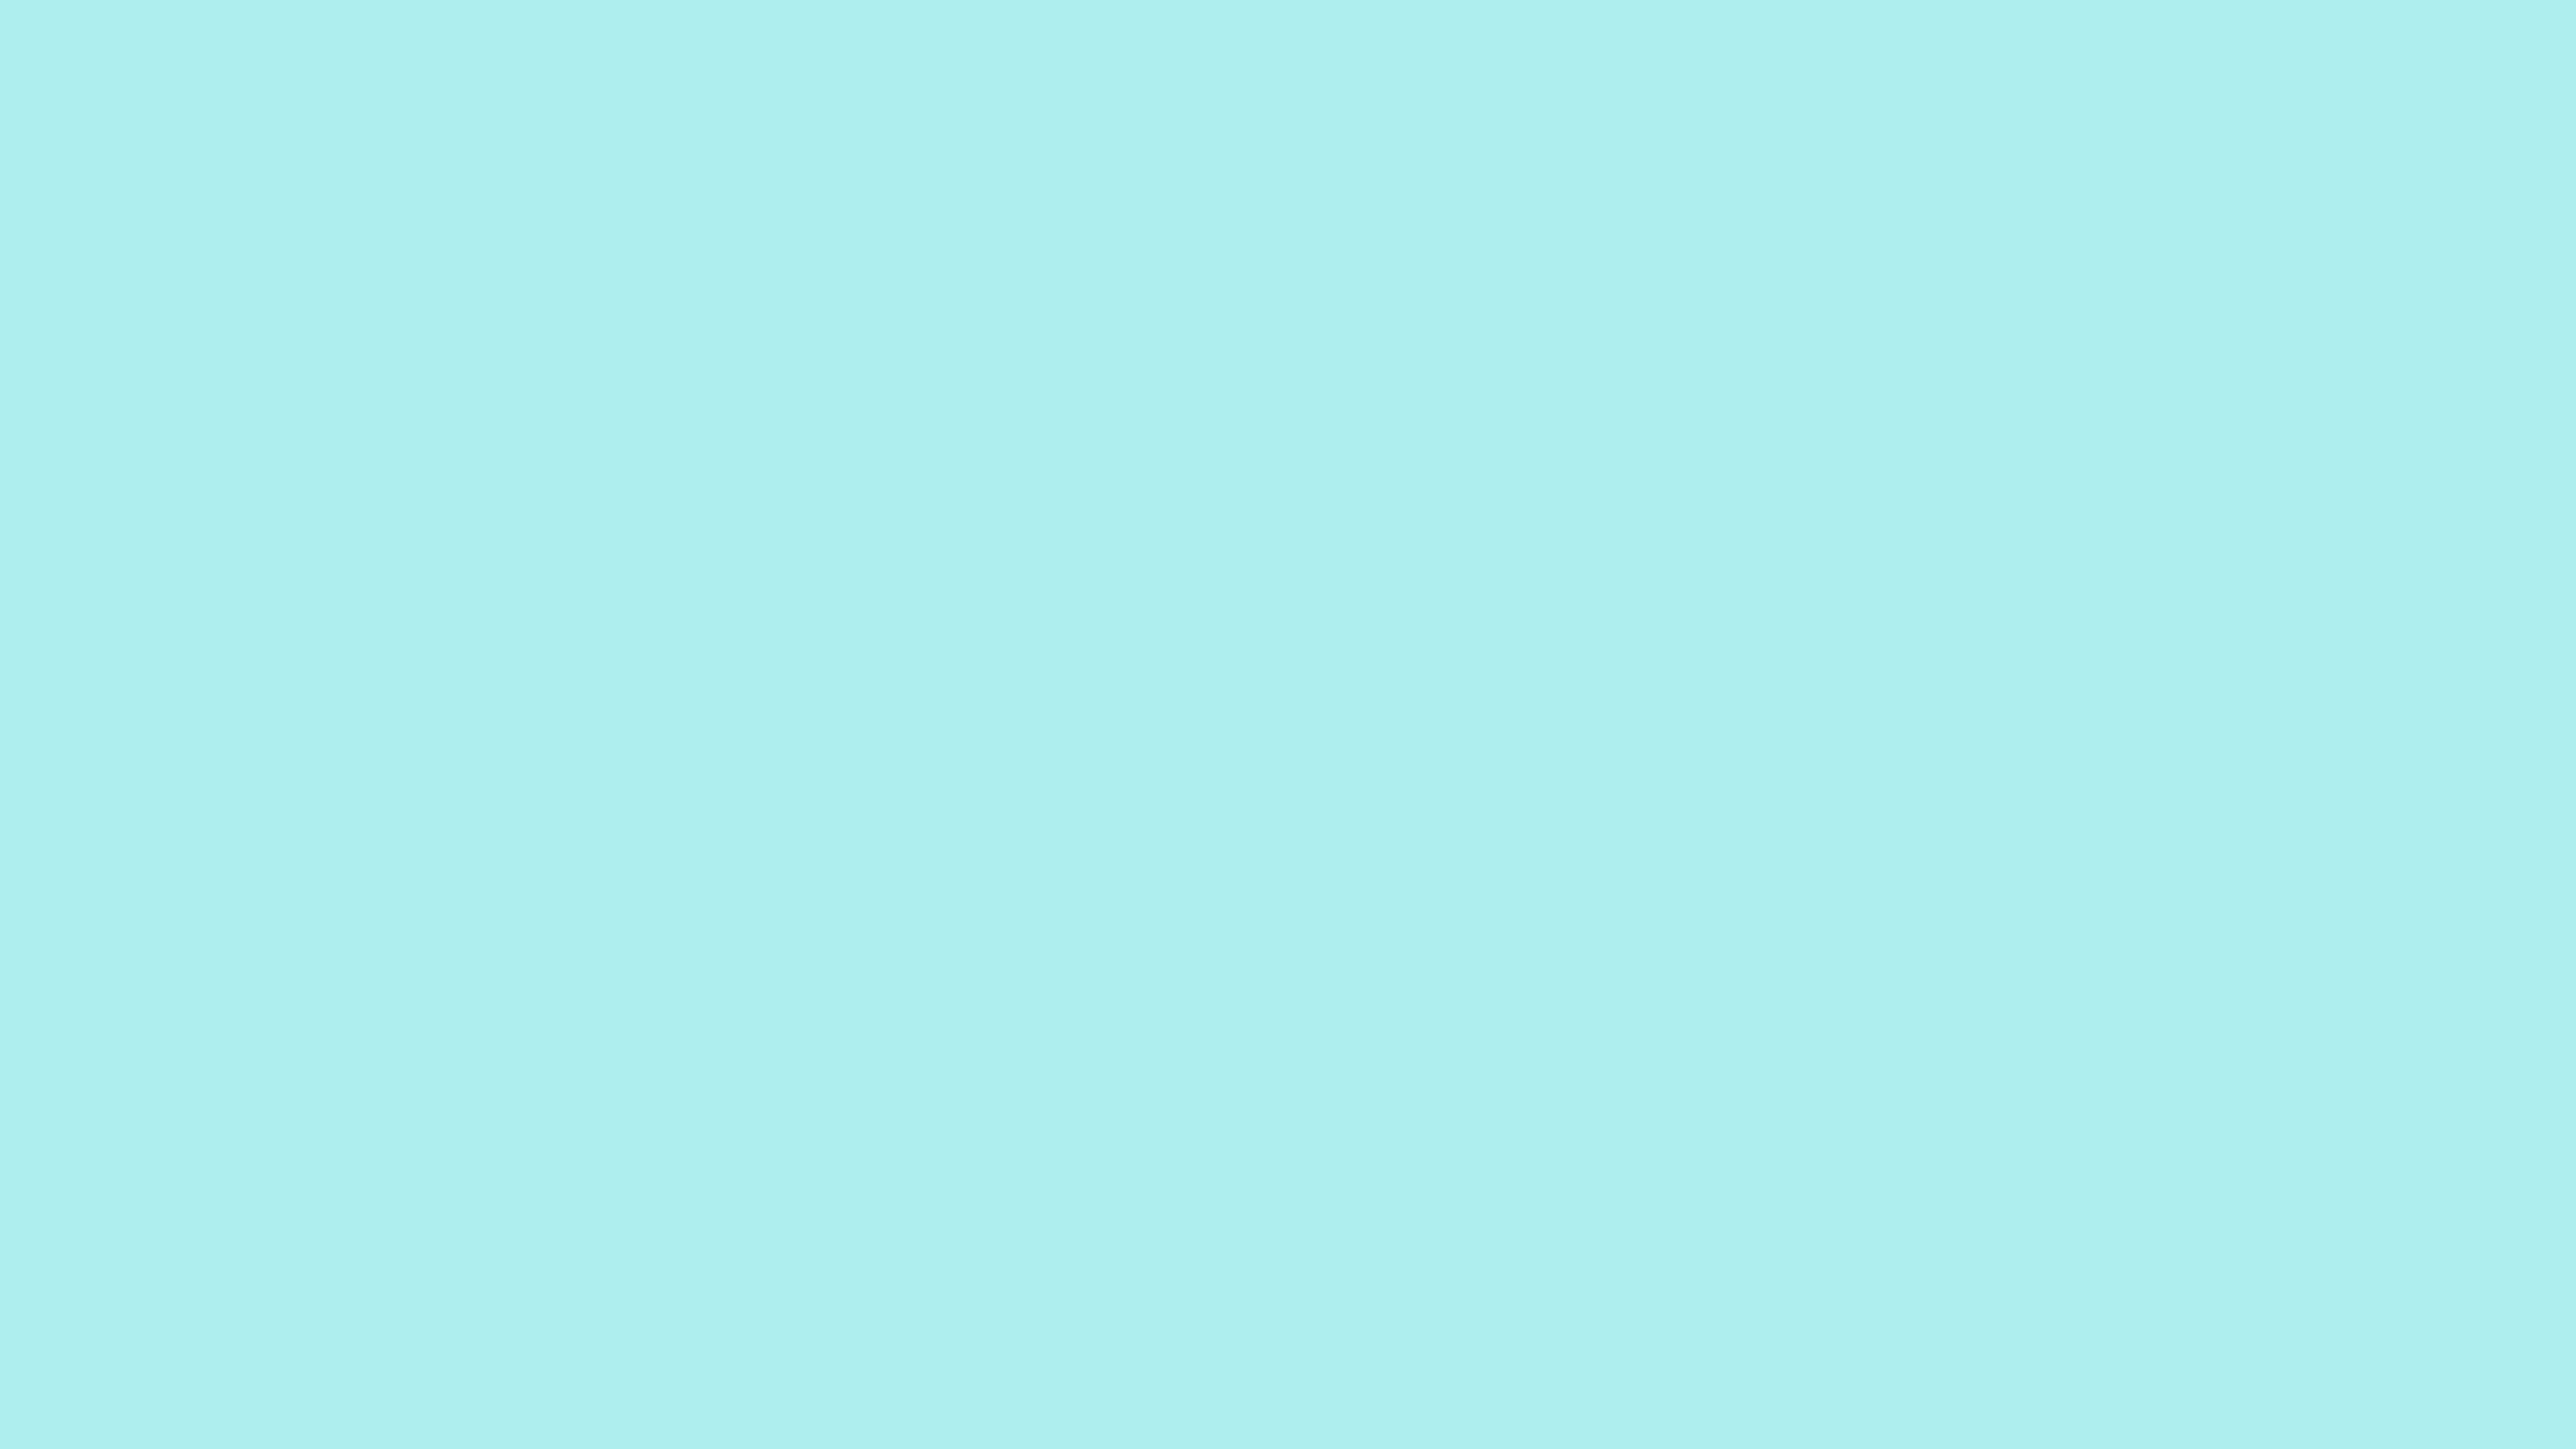 7680x4320 Pale Turquoise Solid Color Background